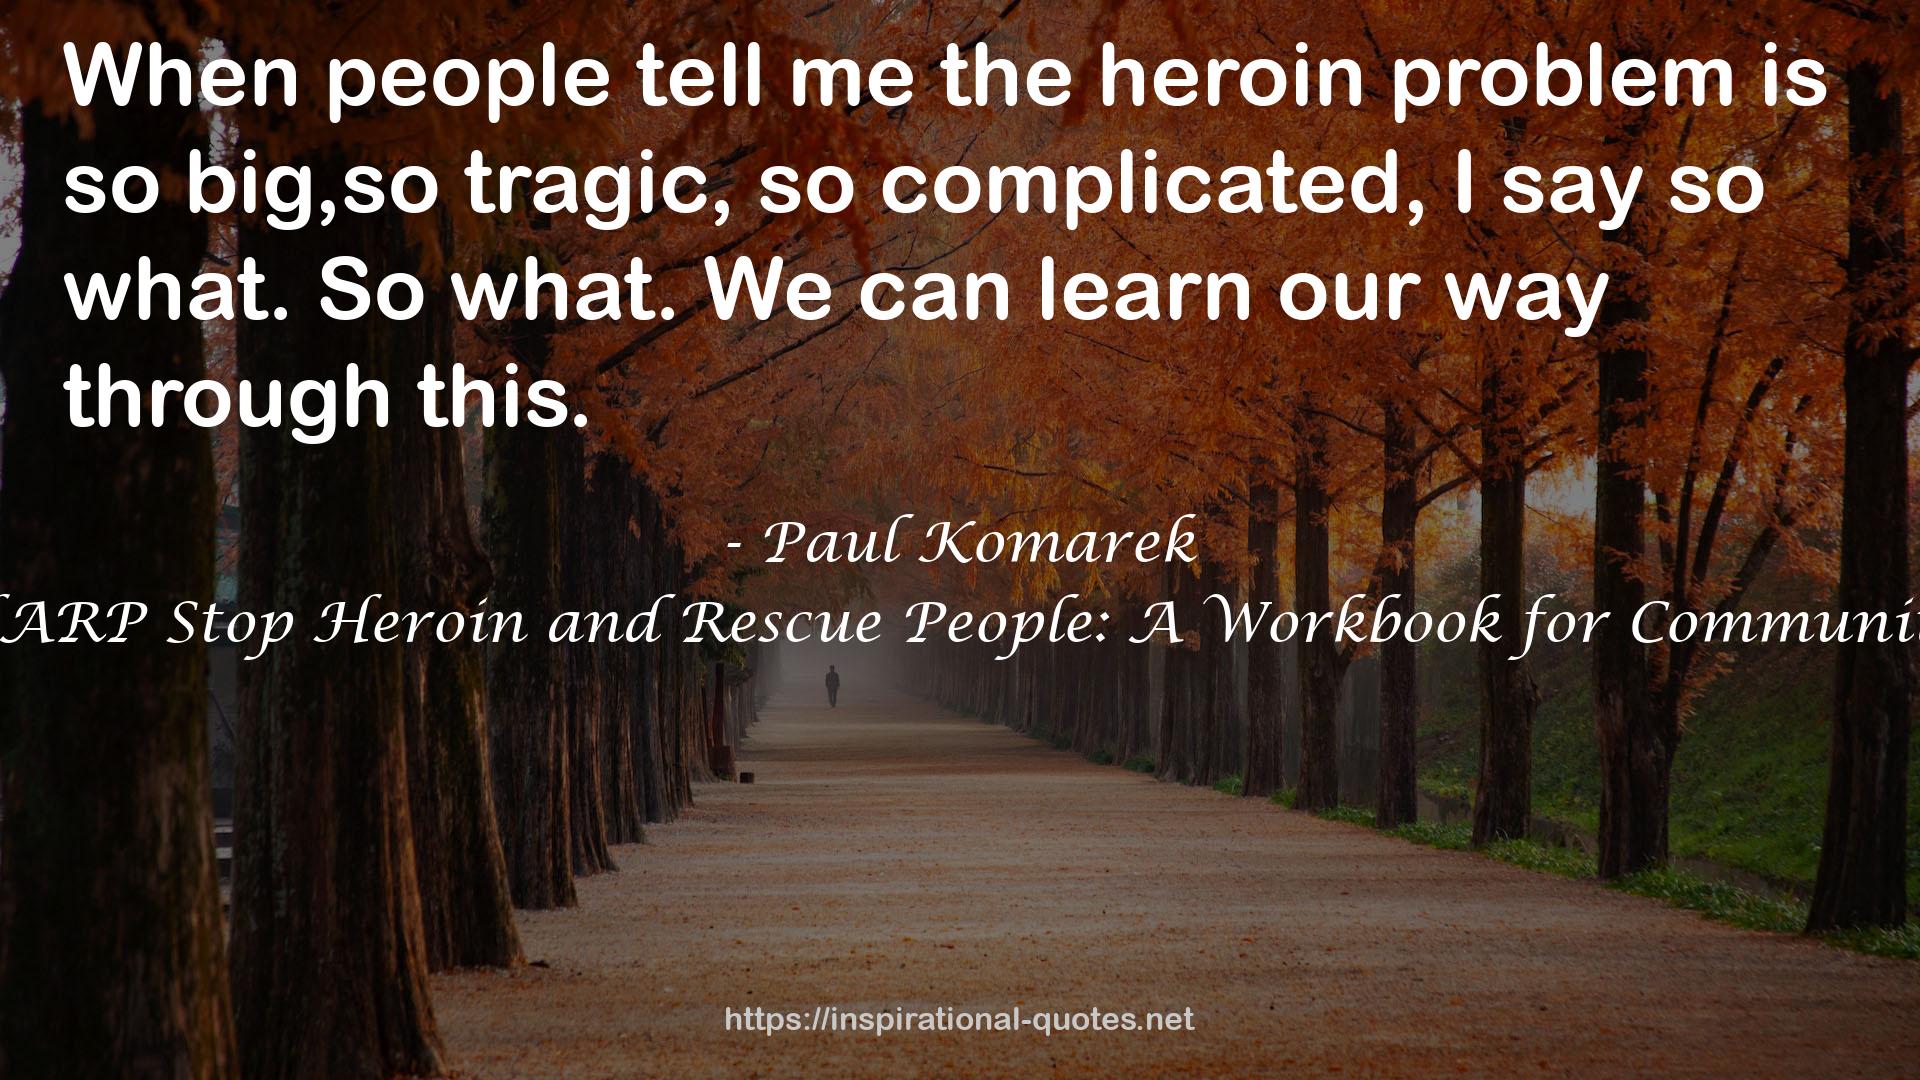 SHARP Stop Heroin and Rescue People: A Workbook for Communities QUOTES